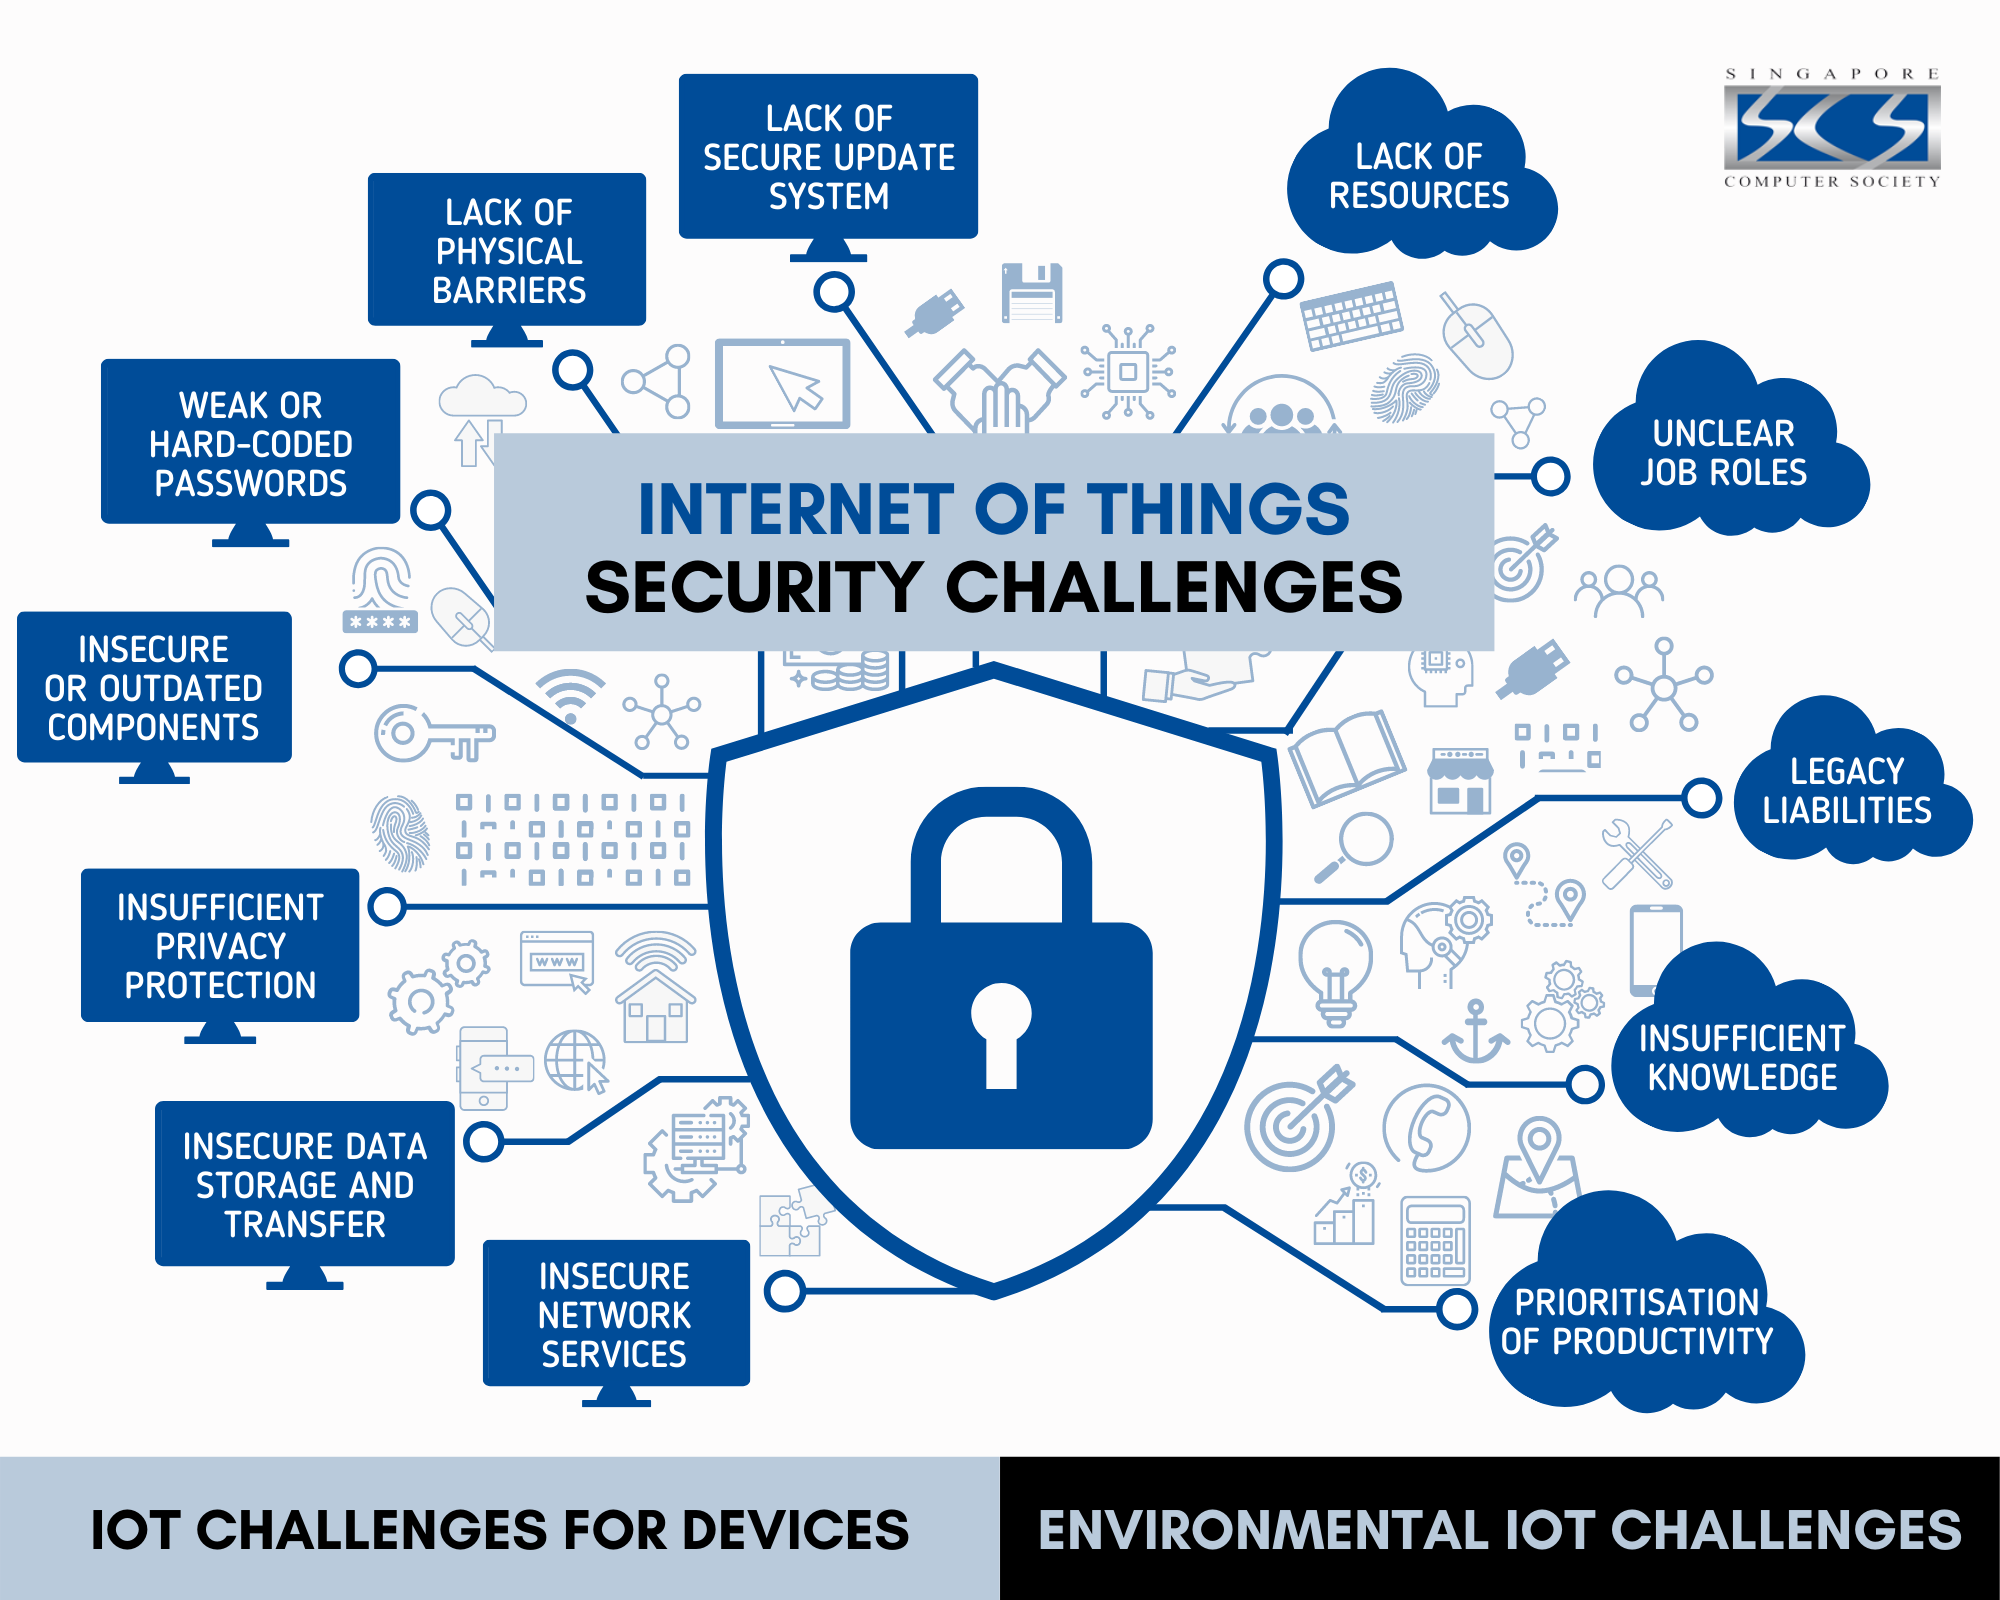 How Does The Issue Of Cybersecurity Relate To The Internet Of Things?